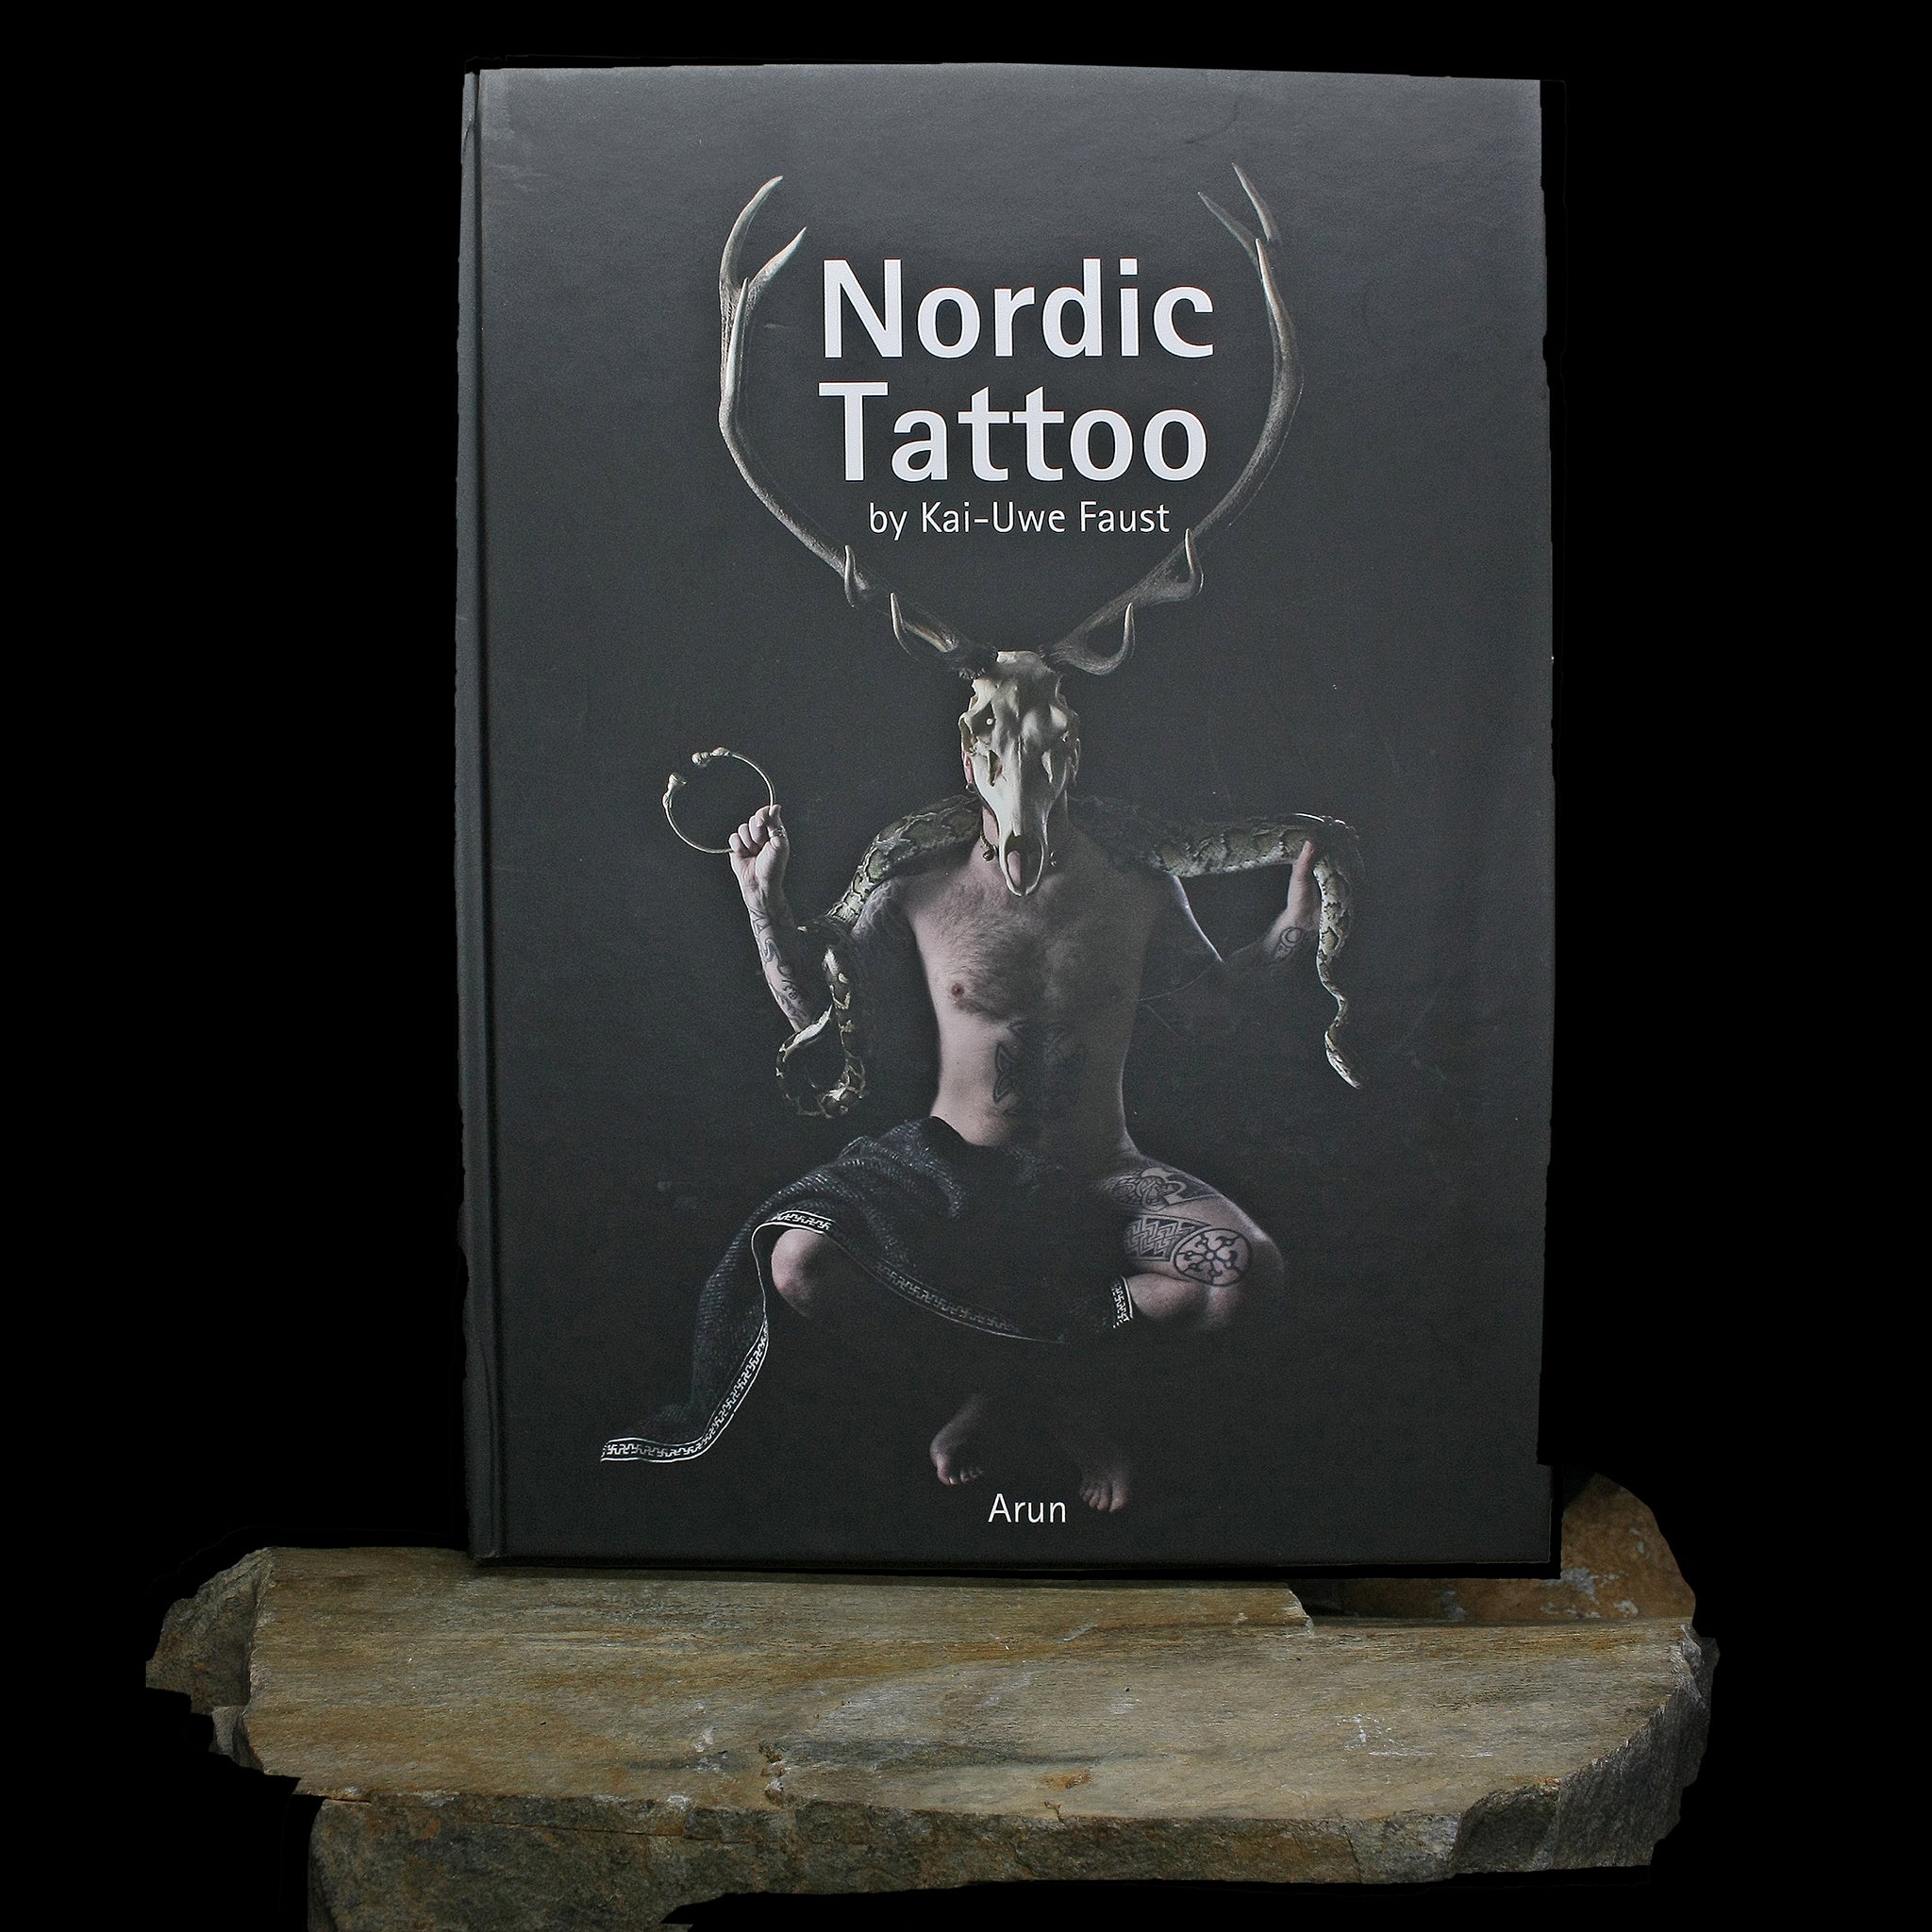 Nordic Tattoo Book by Kai-Uwe Faust - 4th Edition - On Rock